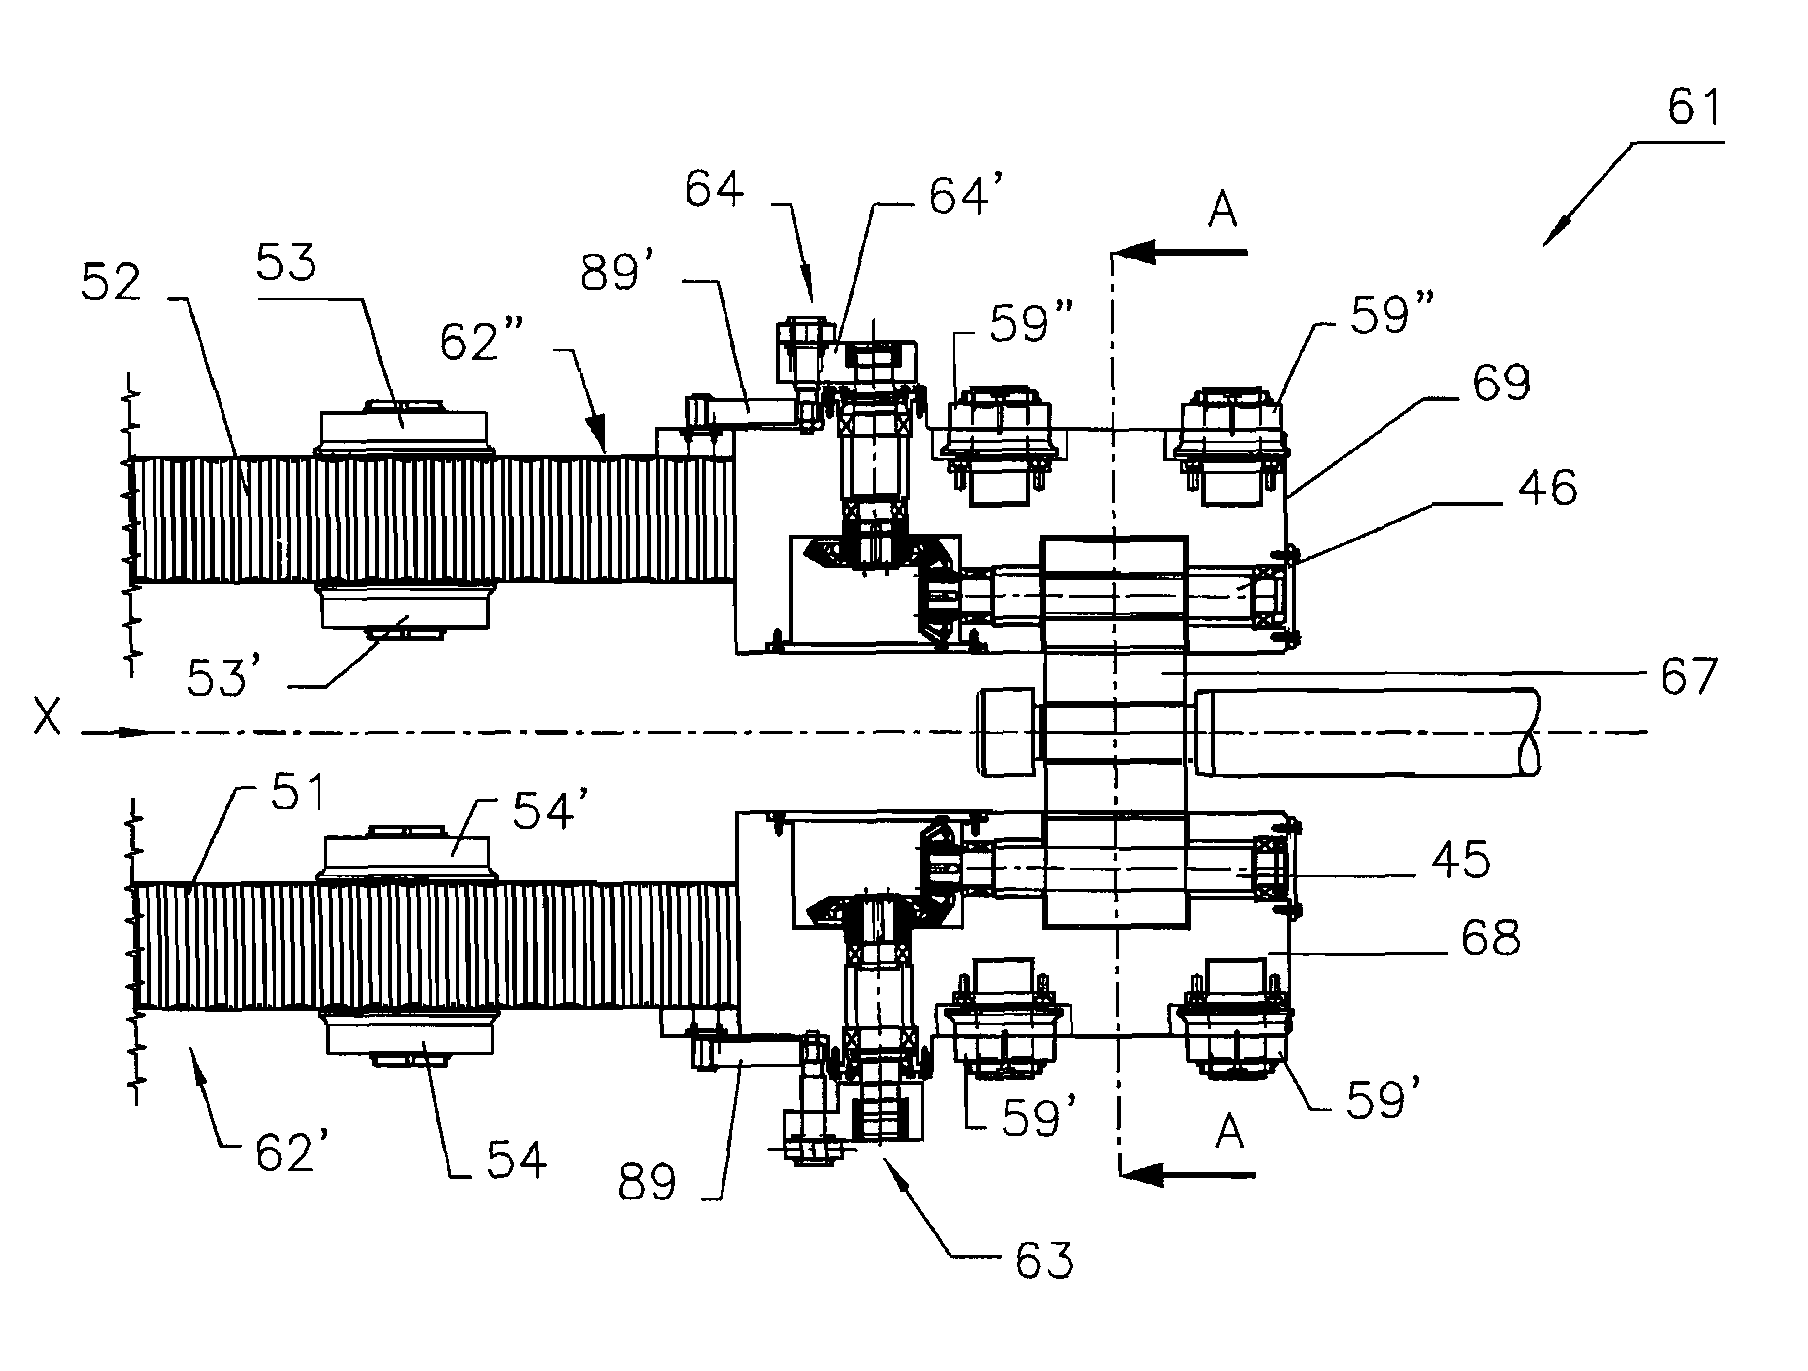 Mandrel conveying device for a tube rolling mill